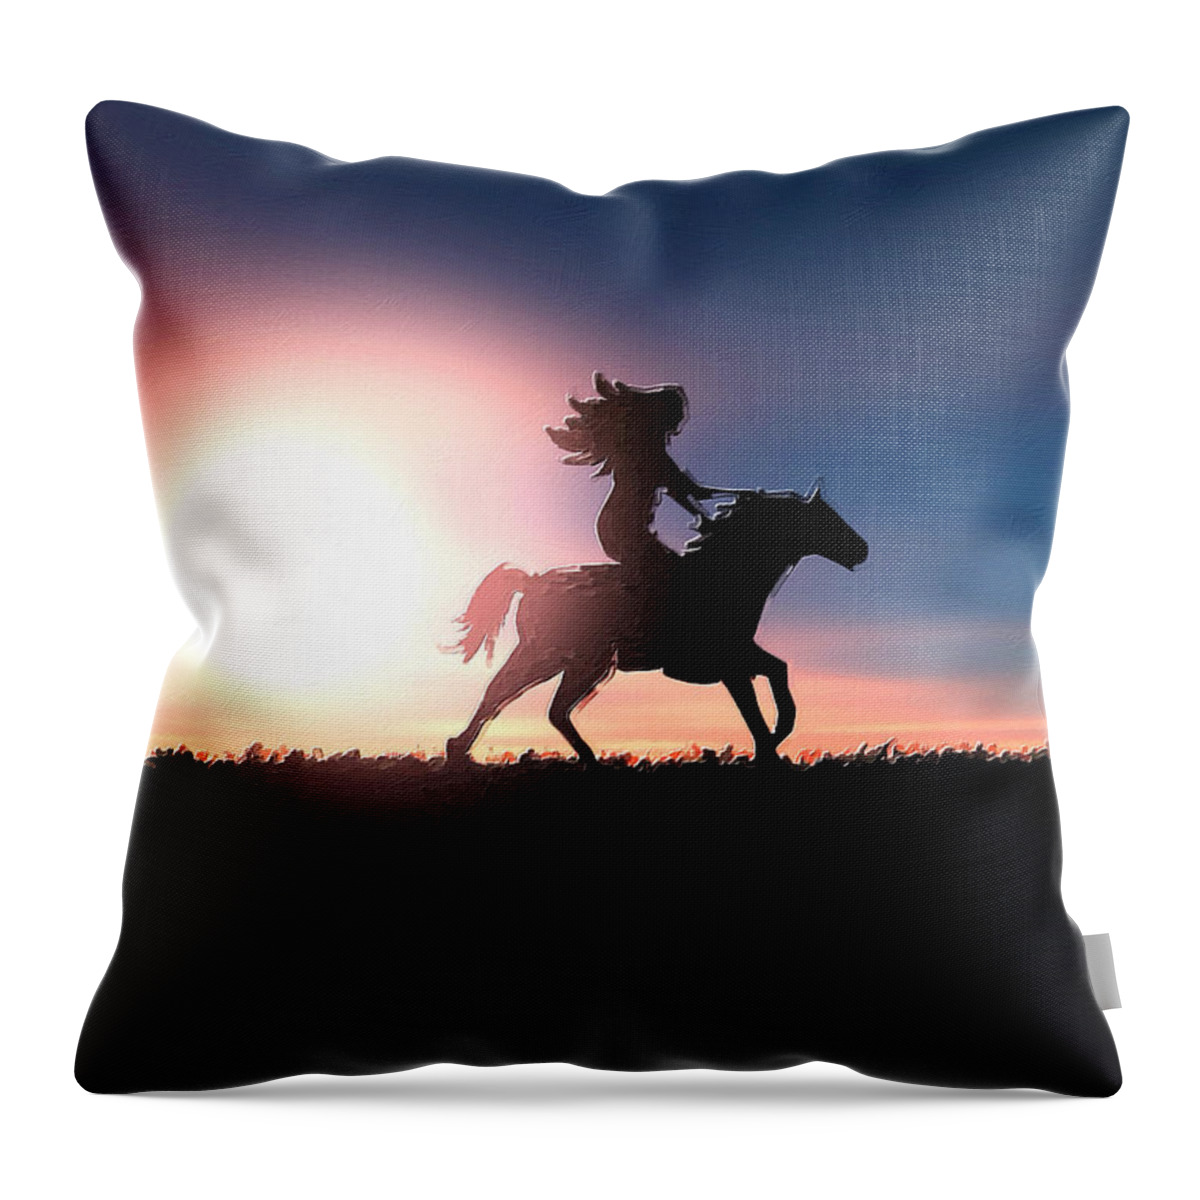 Horse Throw Pillow featuring the painting Horse Rider Sunset The West by Tony Rubino